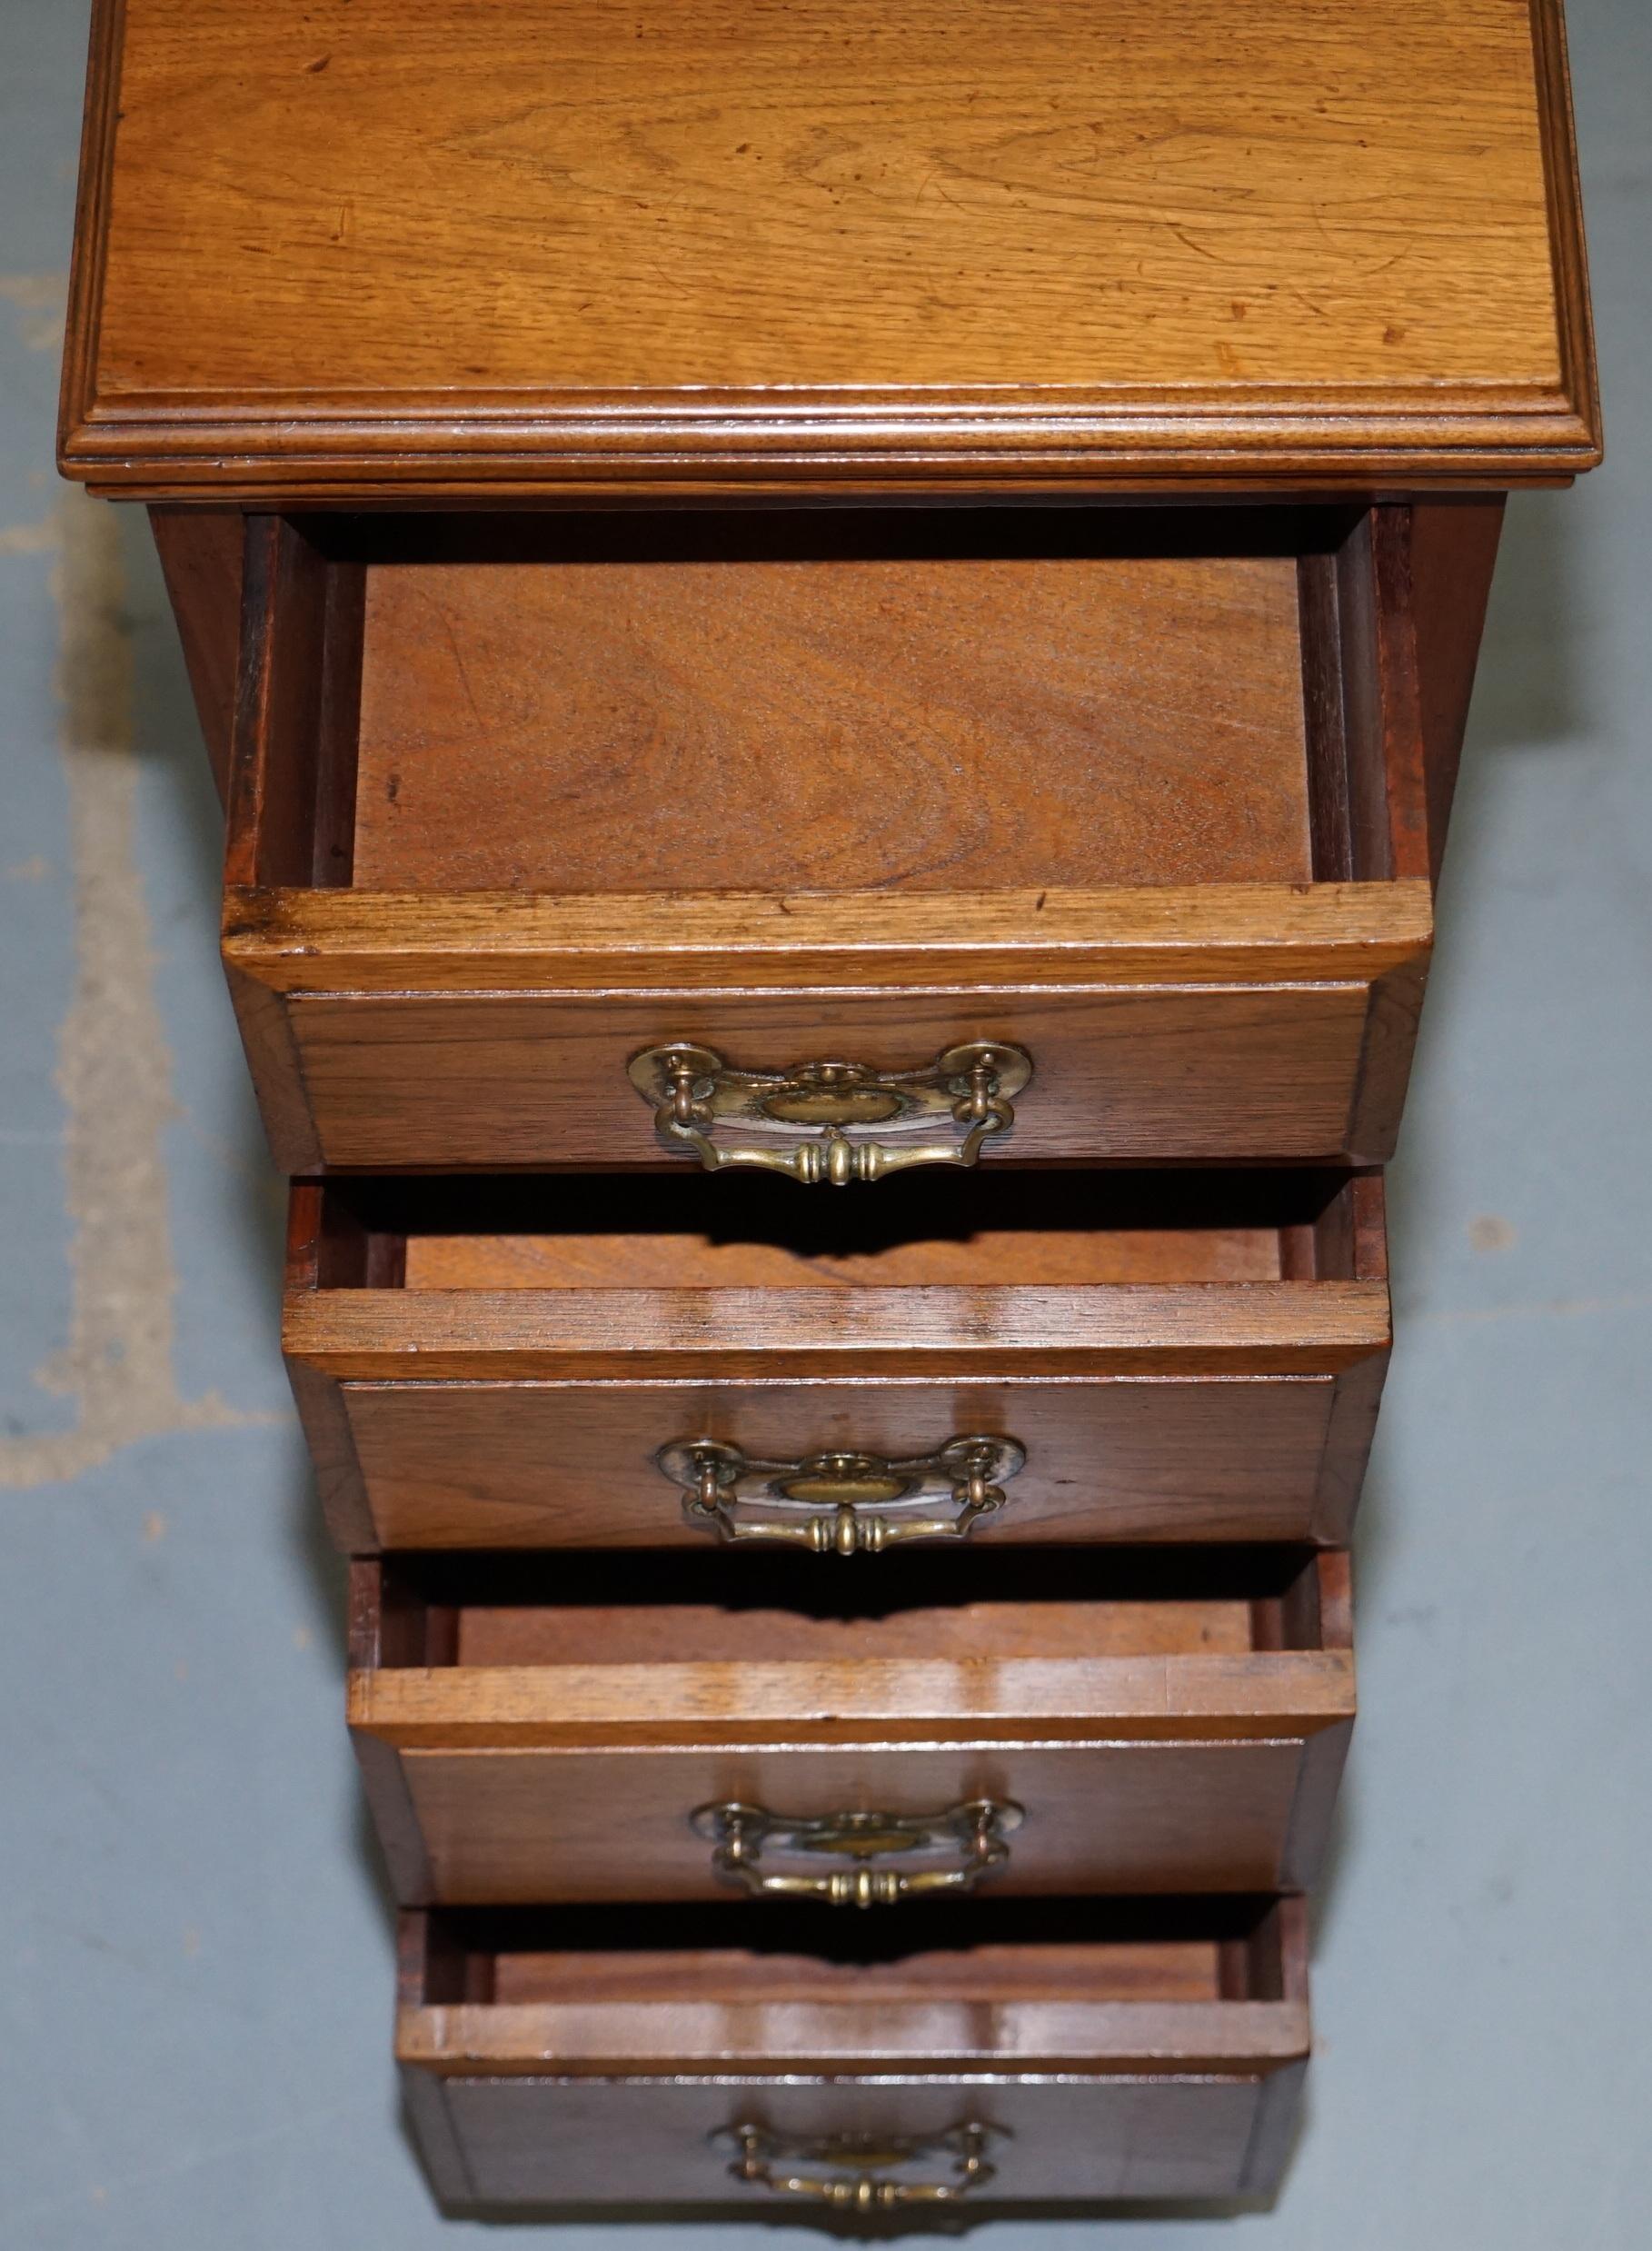 Pair of Tall Victorian Walnut Chest of Drawers, Lamp Wine Occasional End Tables For Sale 11